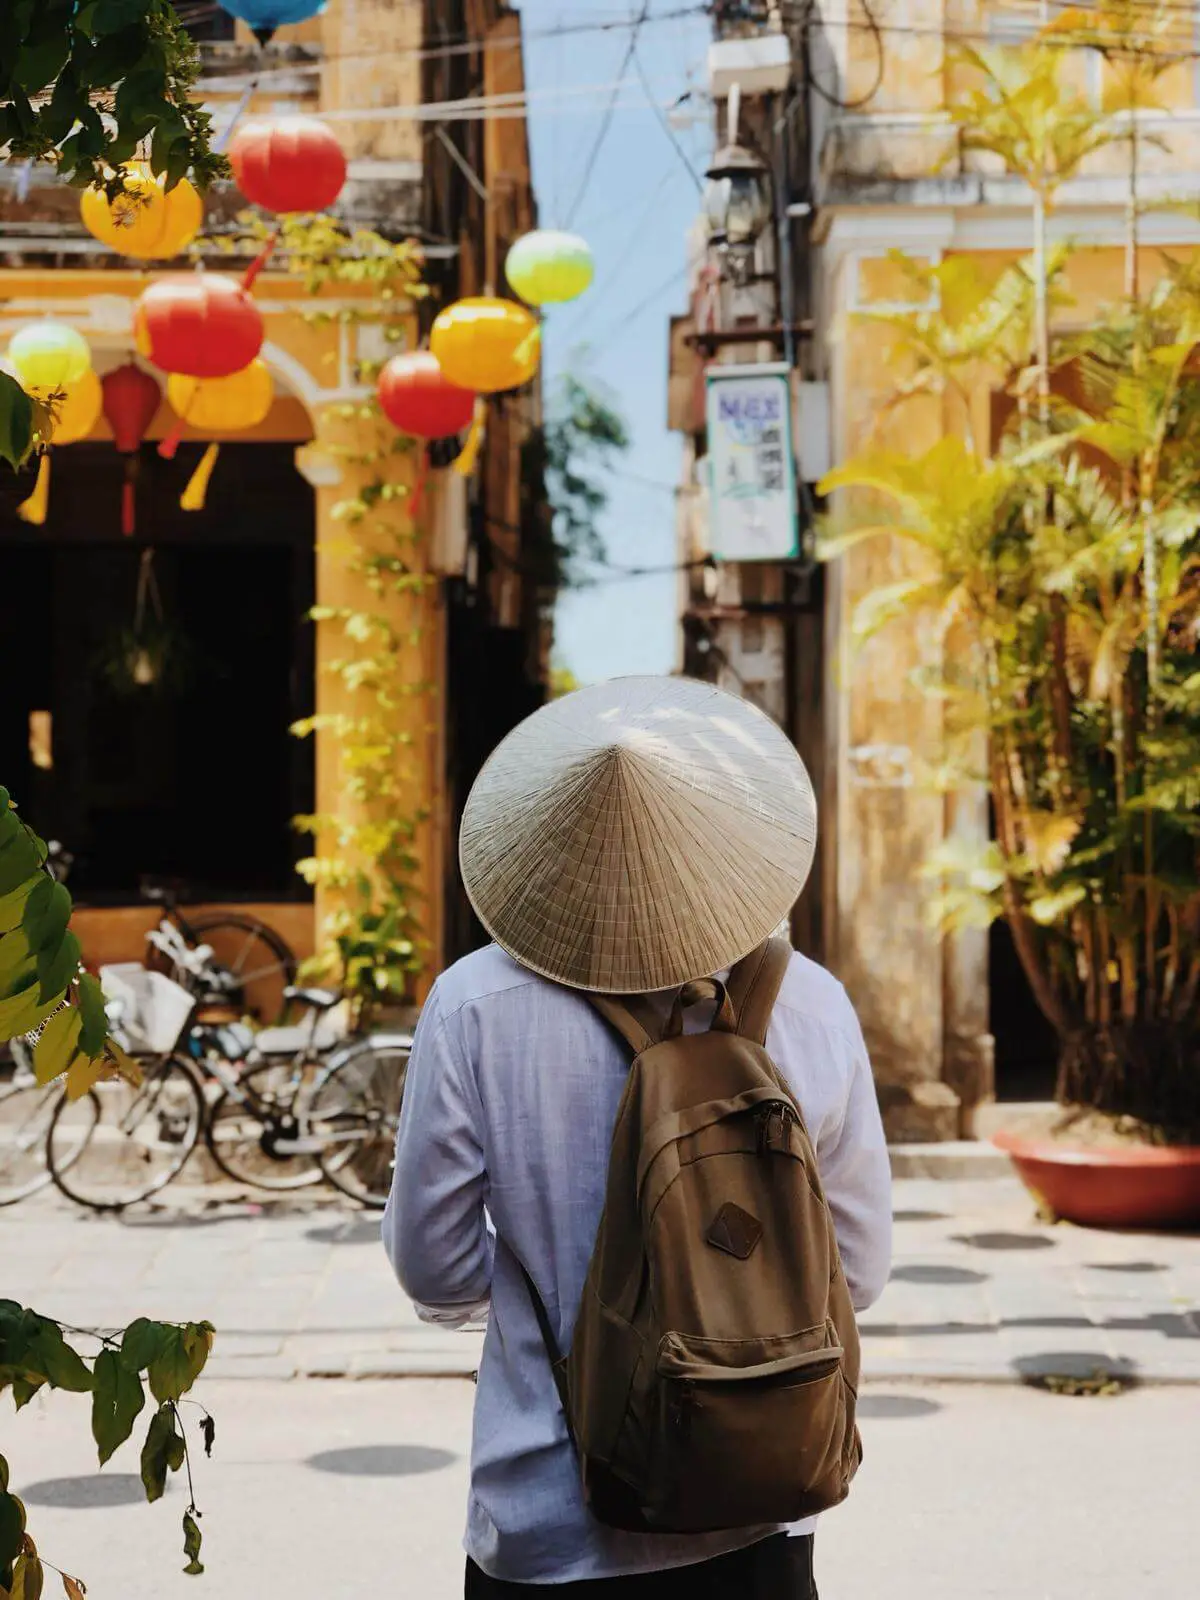 Vietnam itinerary 3 weeks - 3 days in hoi an